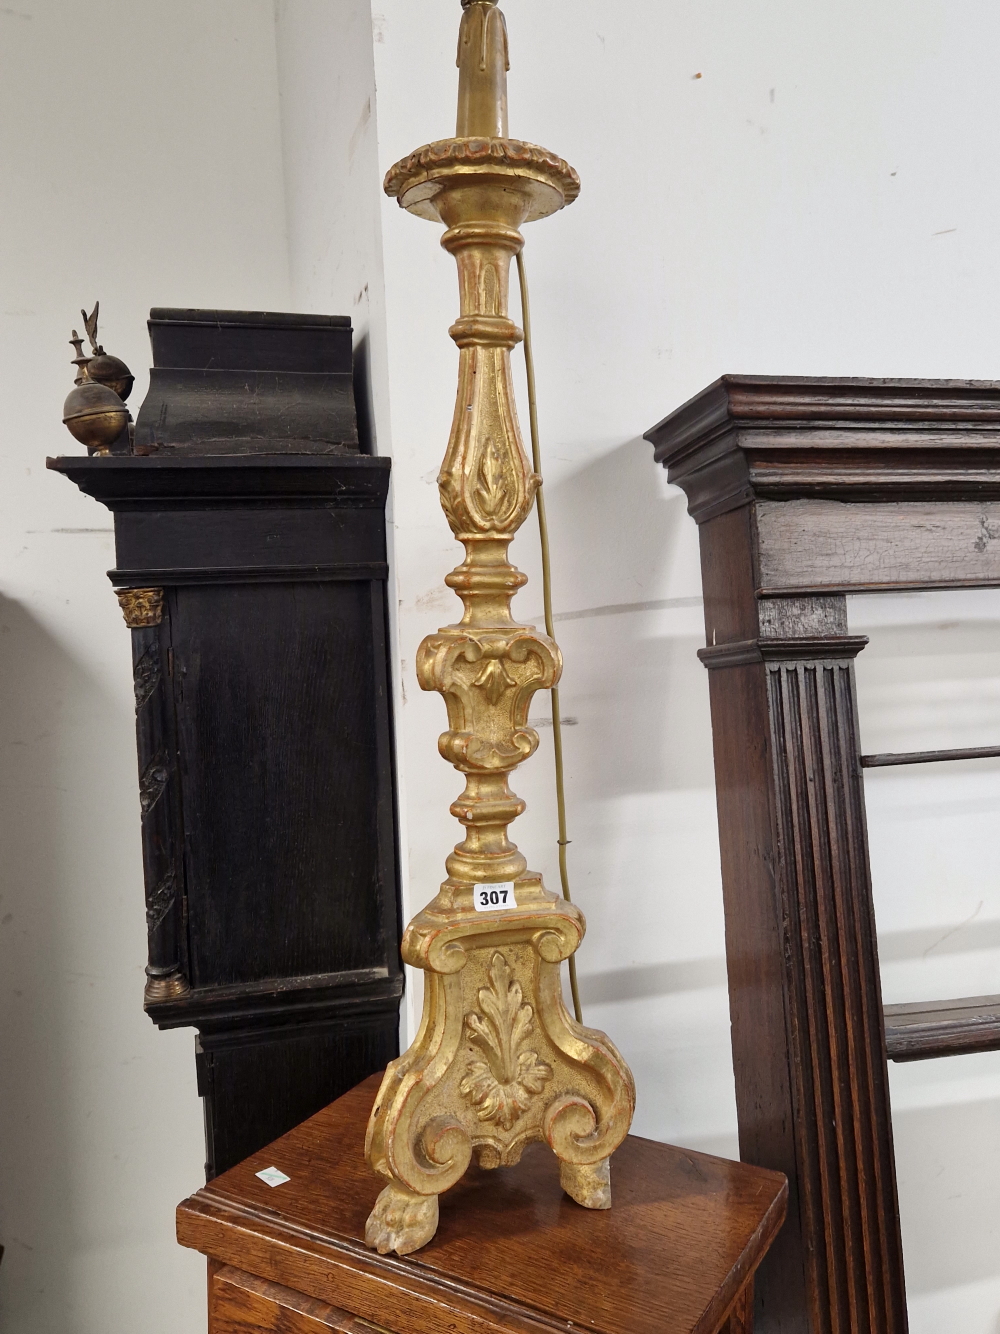 A BAROQUE STYLE GILT AND CARVED WOOD CANDLESTICK LAMP, THE BASE WITH THREE BRACKET LEGS CENTRED BY